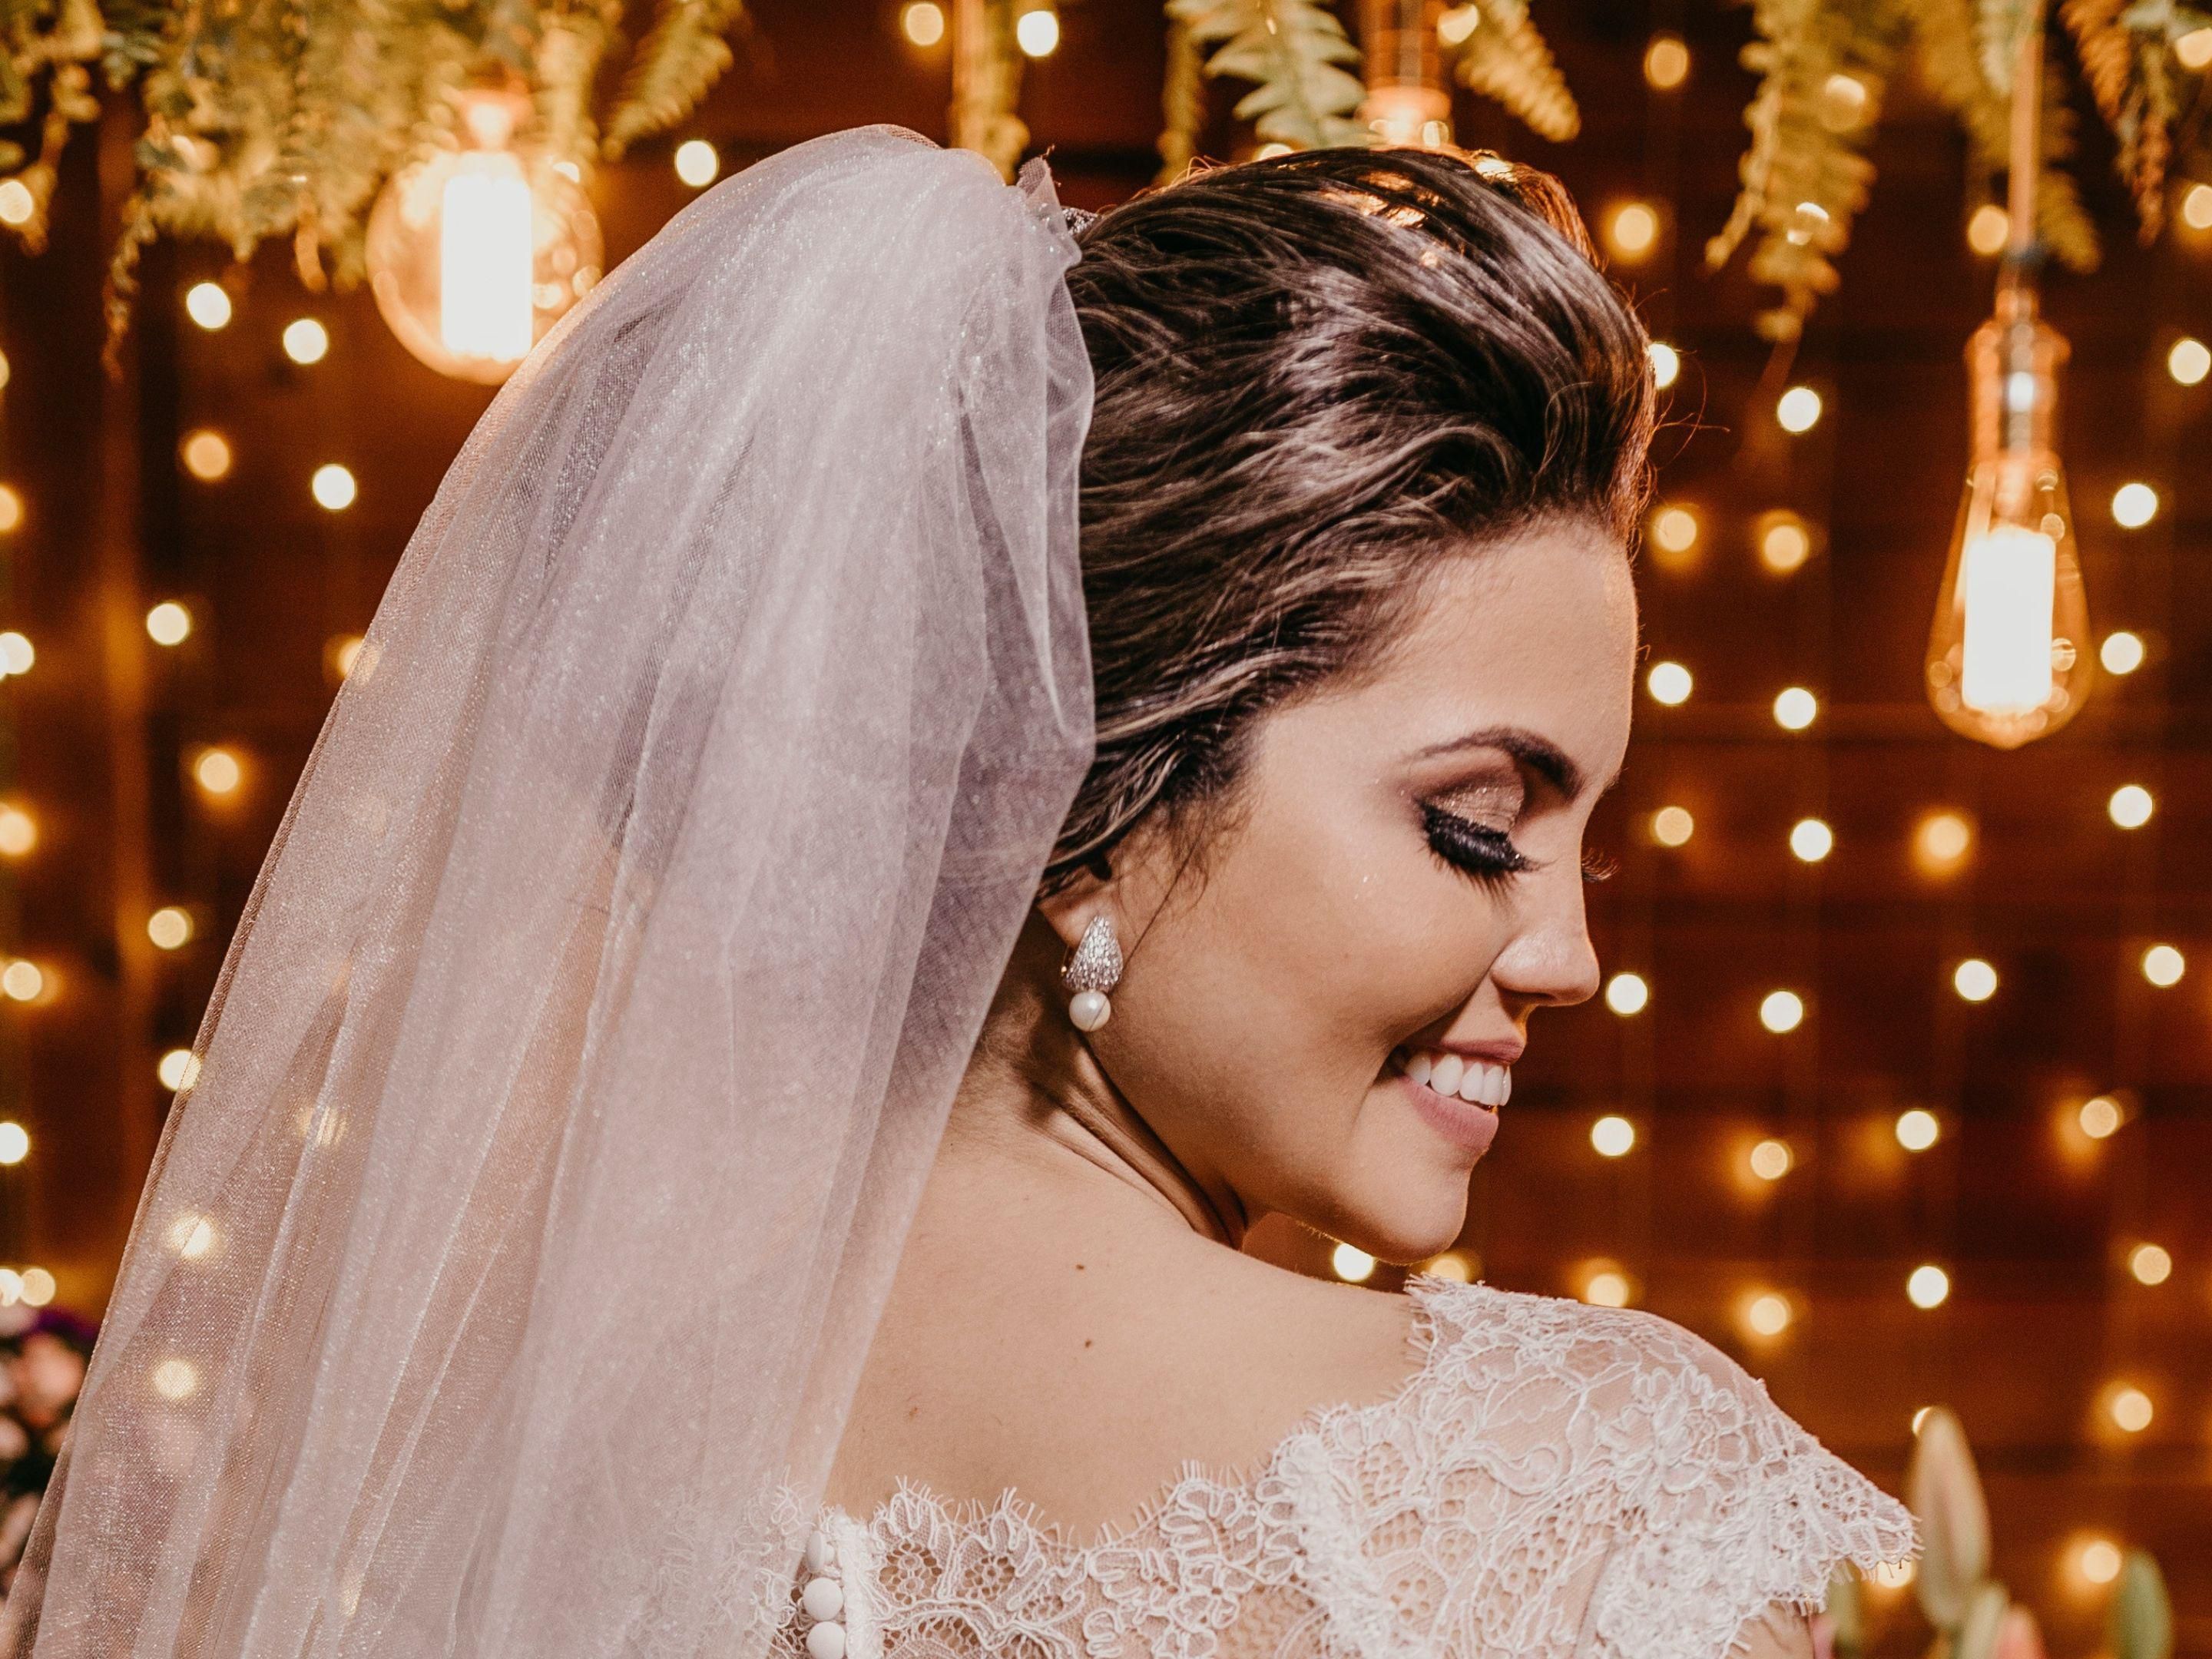 From the ceremony to the reception, make your wedding day unforgettable with Holiday Inn® Abu Dhabi. Celebrate your love story with our exceptional service and amenities. Fall in love all over again with a stunning wedding.